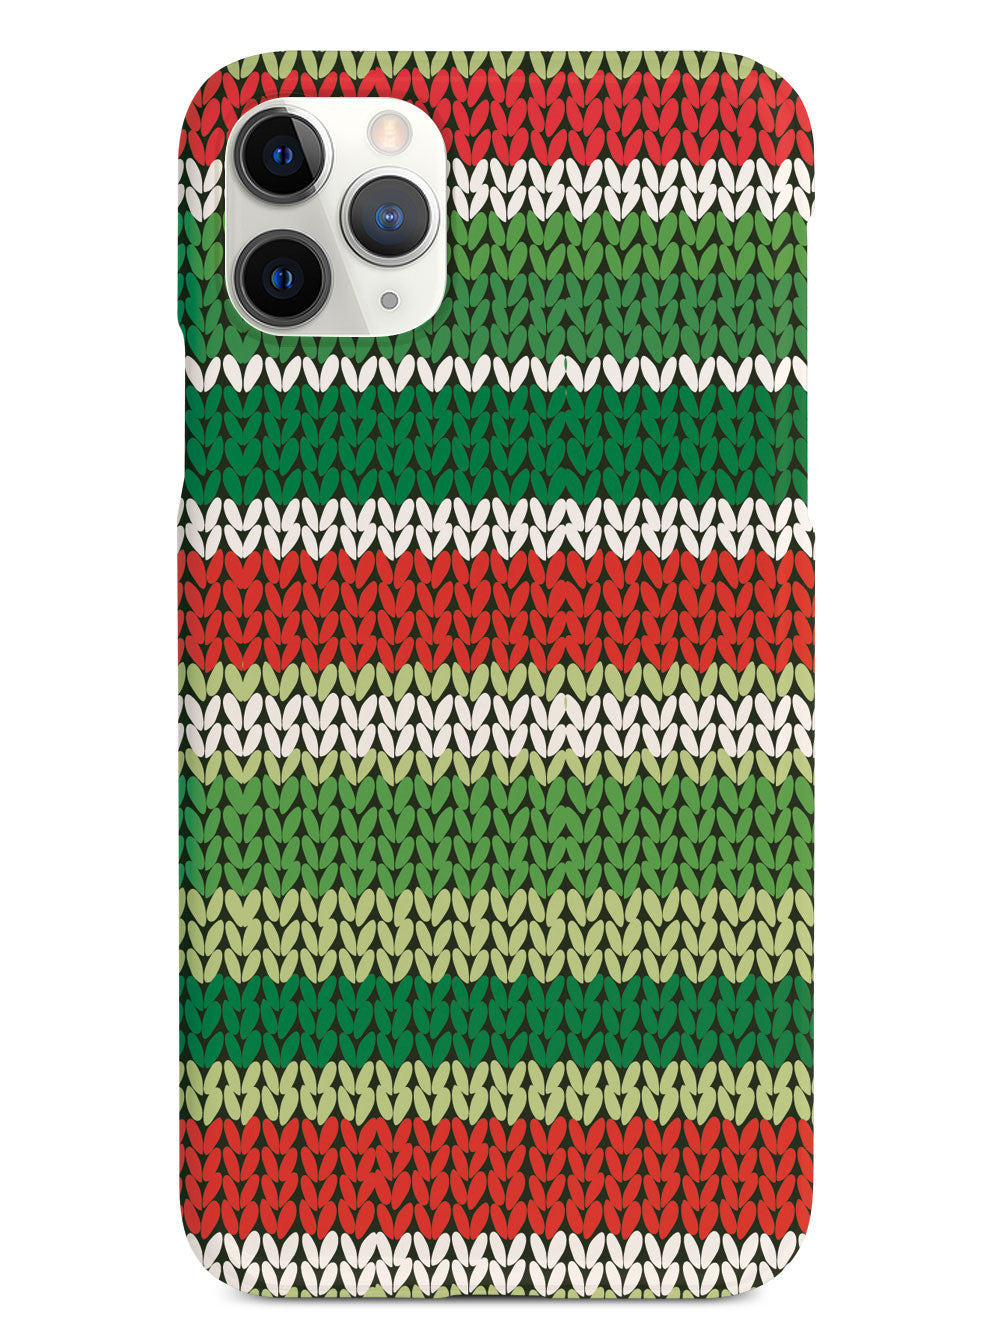 Red and Green Sweater Texture - Black Case